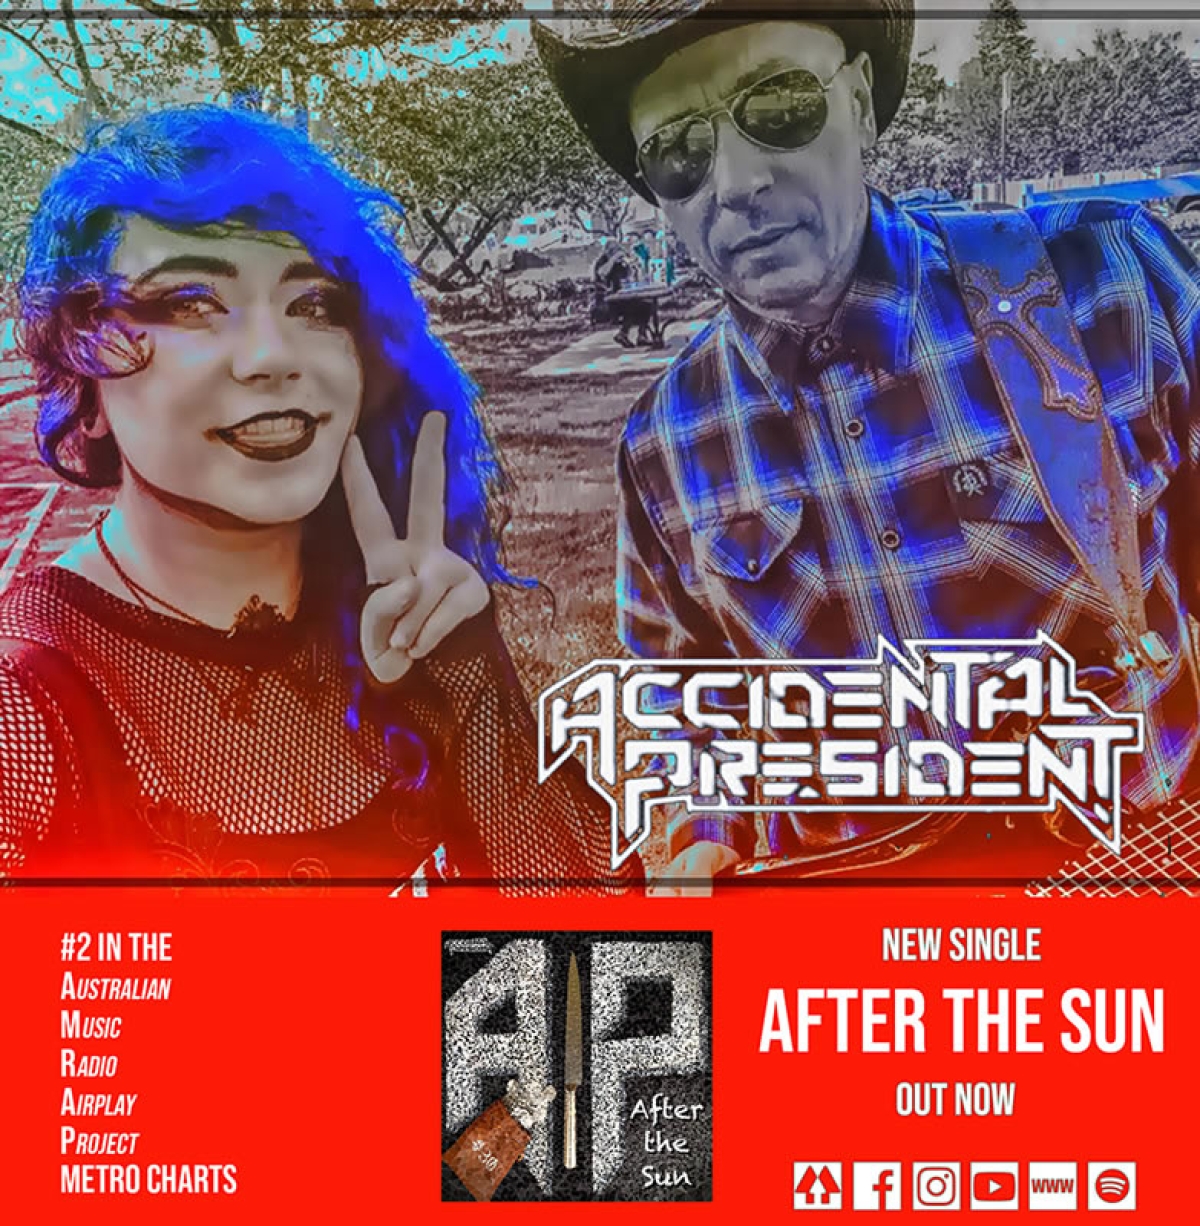 ACCIDENTAL PRESIDENT – single “After The Sun” από το επερχόμενο άλμπουμ “Was it meant to be this way?”